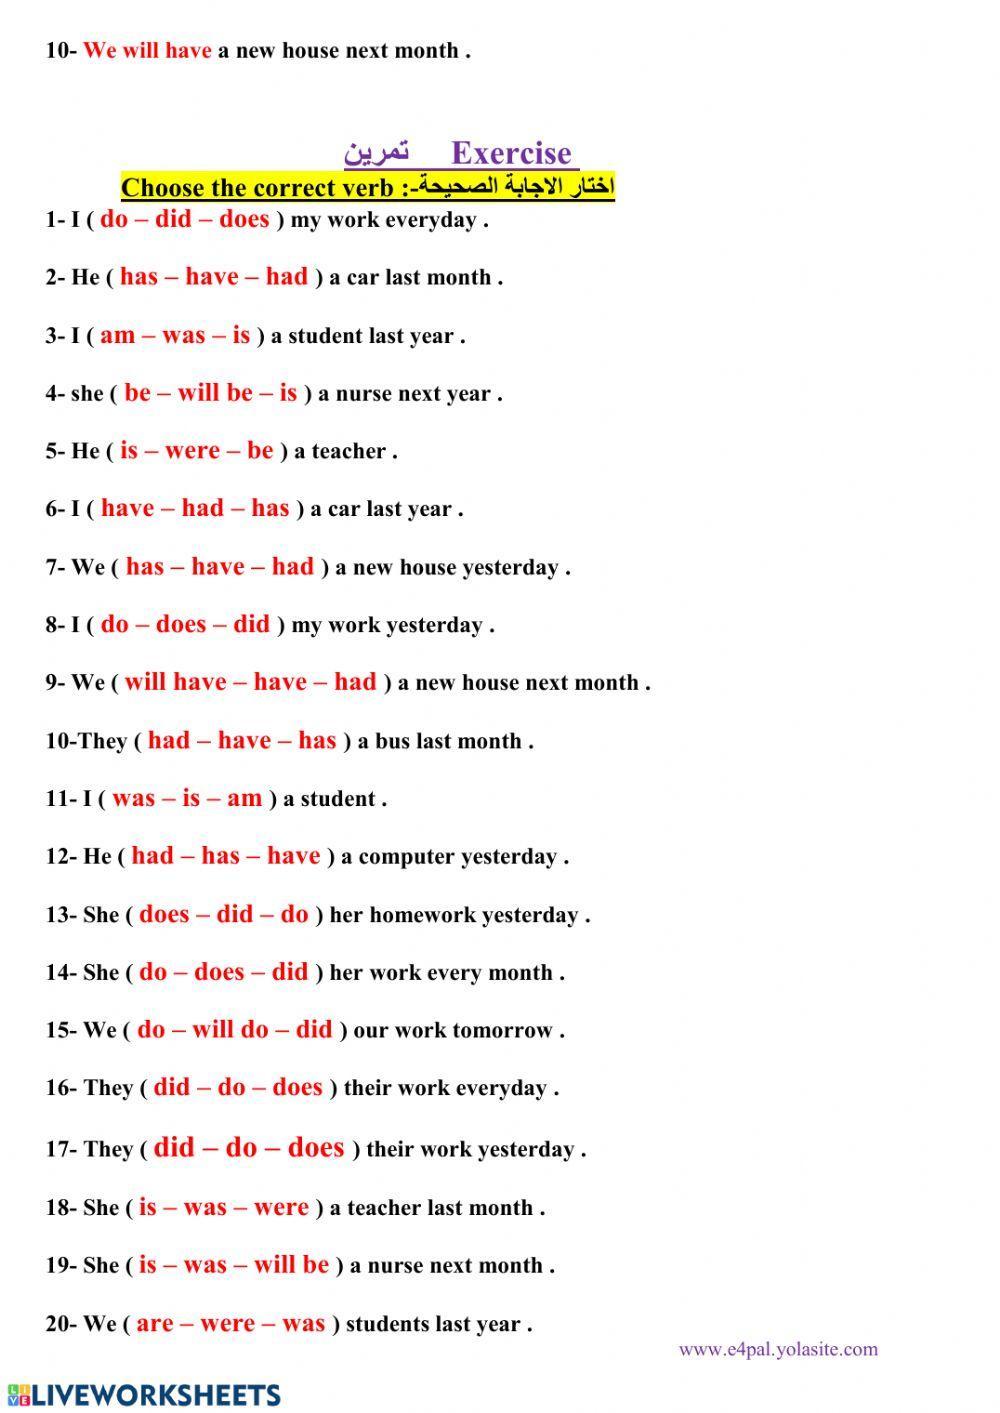 Verbs to: Be, Do, Have